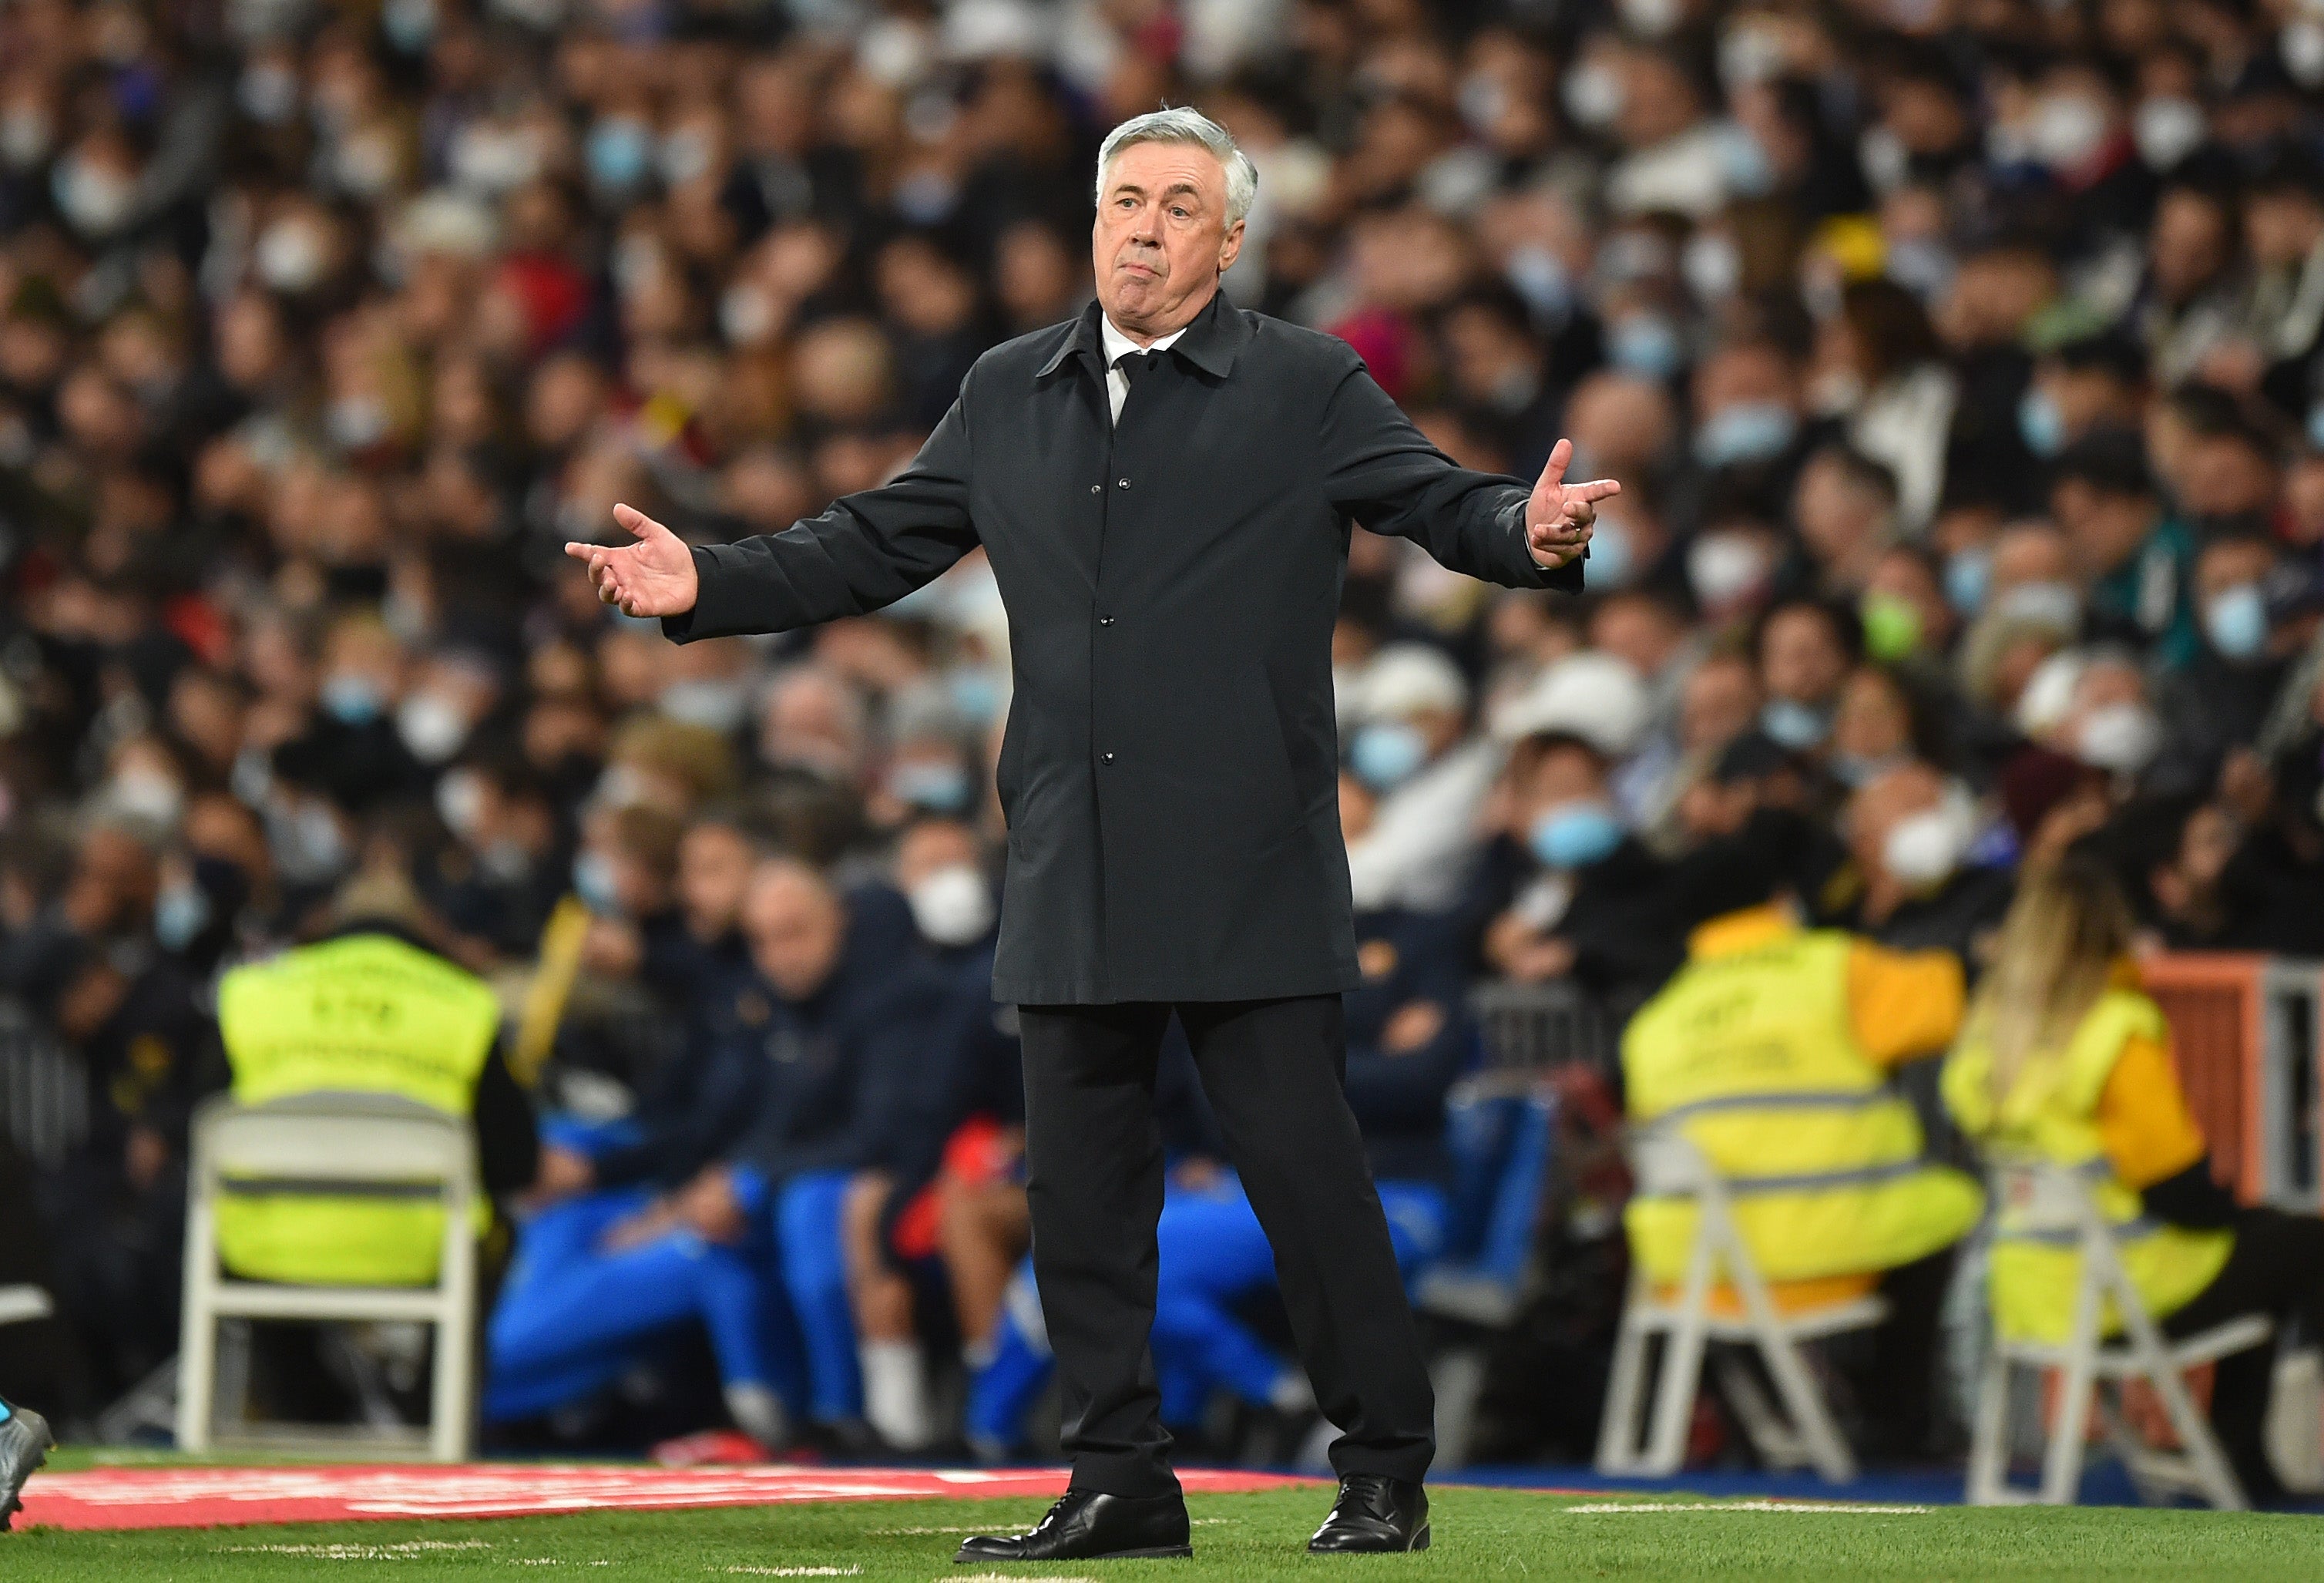 Ancelotti acted coy when asked about Rudiger